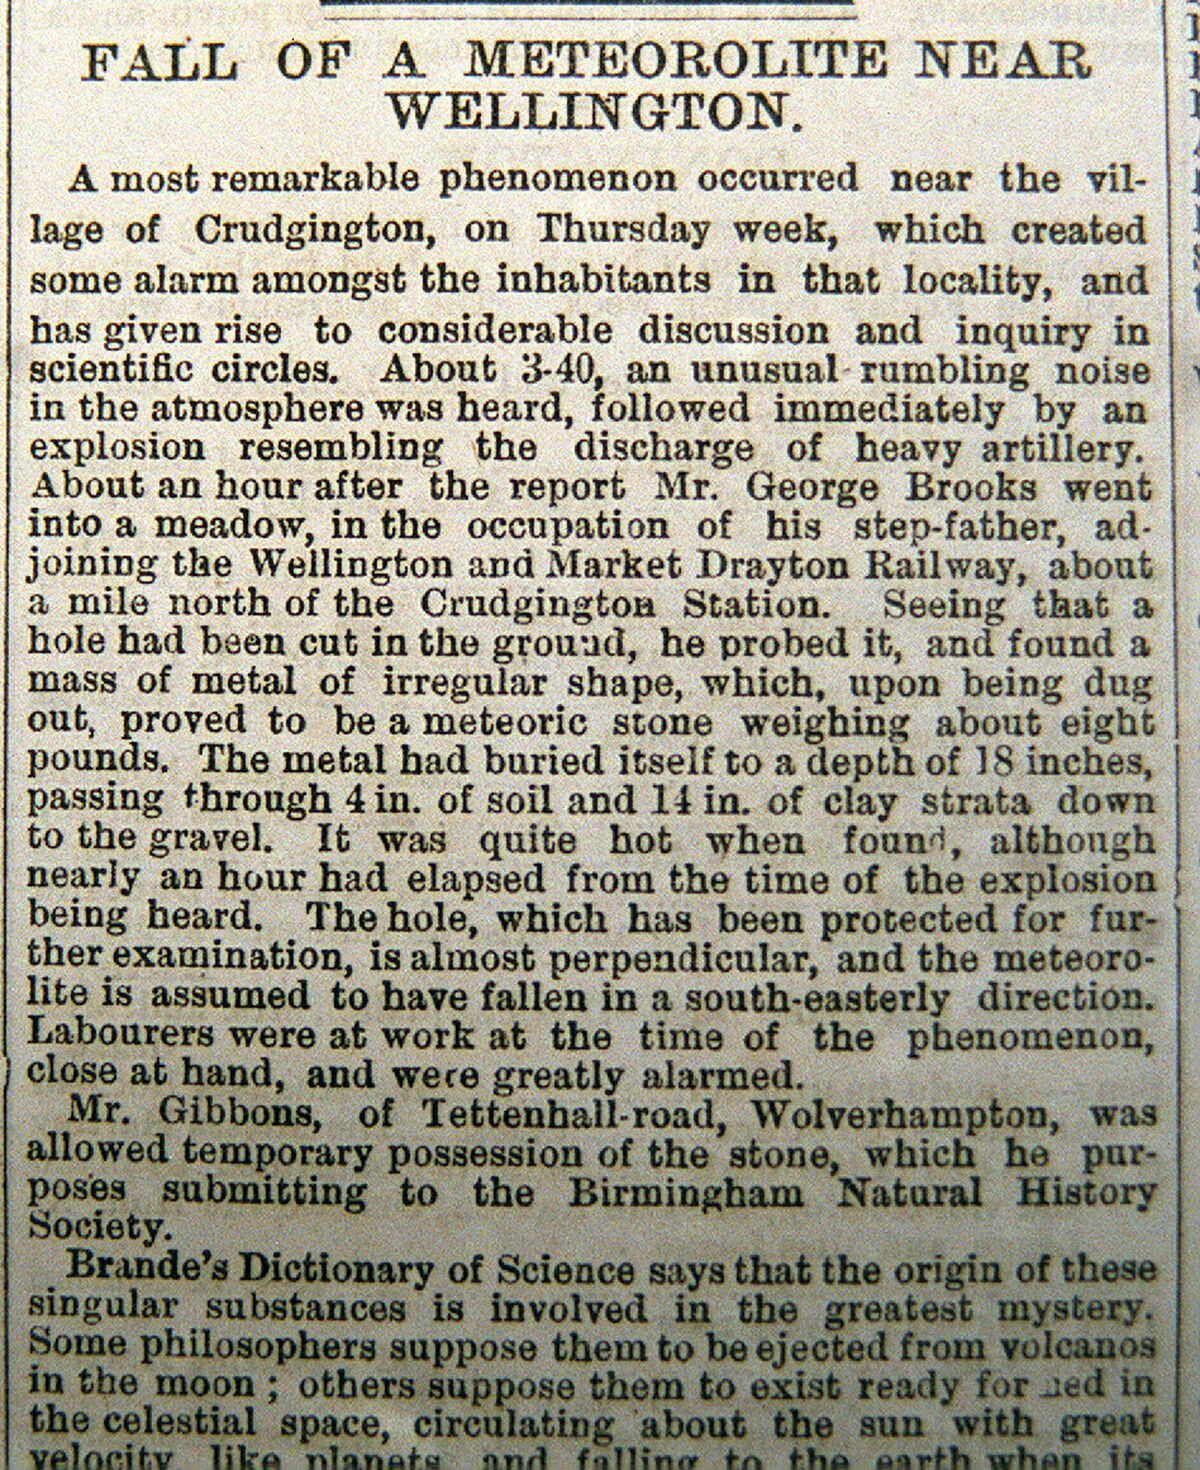 How the incident was reported in the Wellington Journal and Shrewsbury News on April 29, 1876.